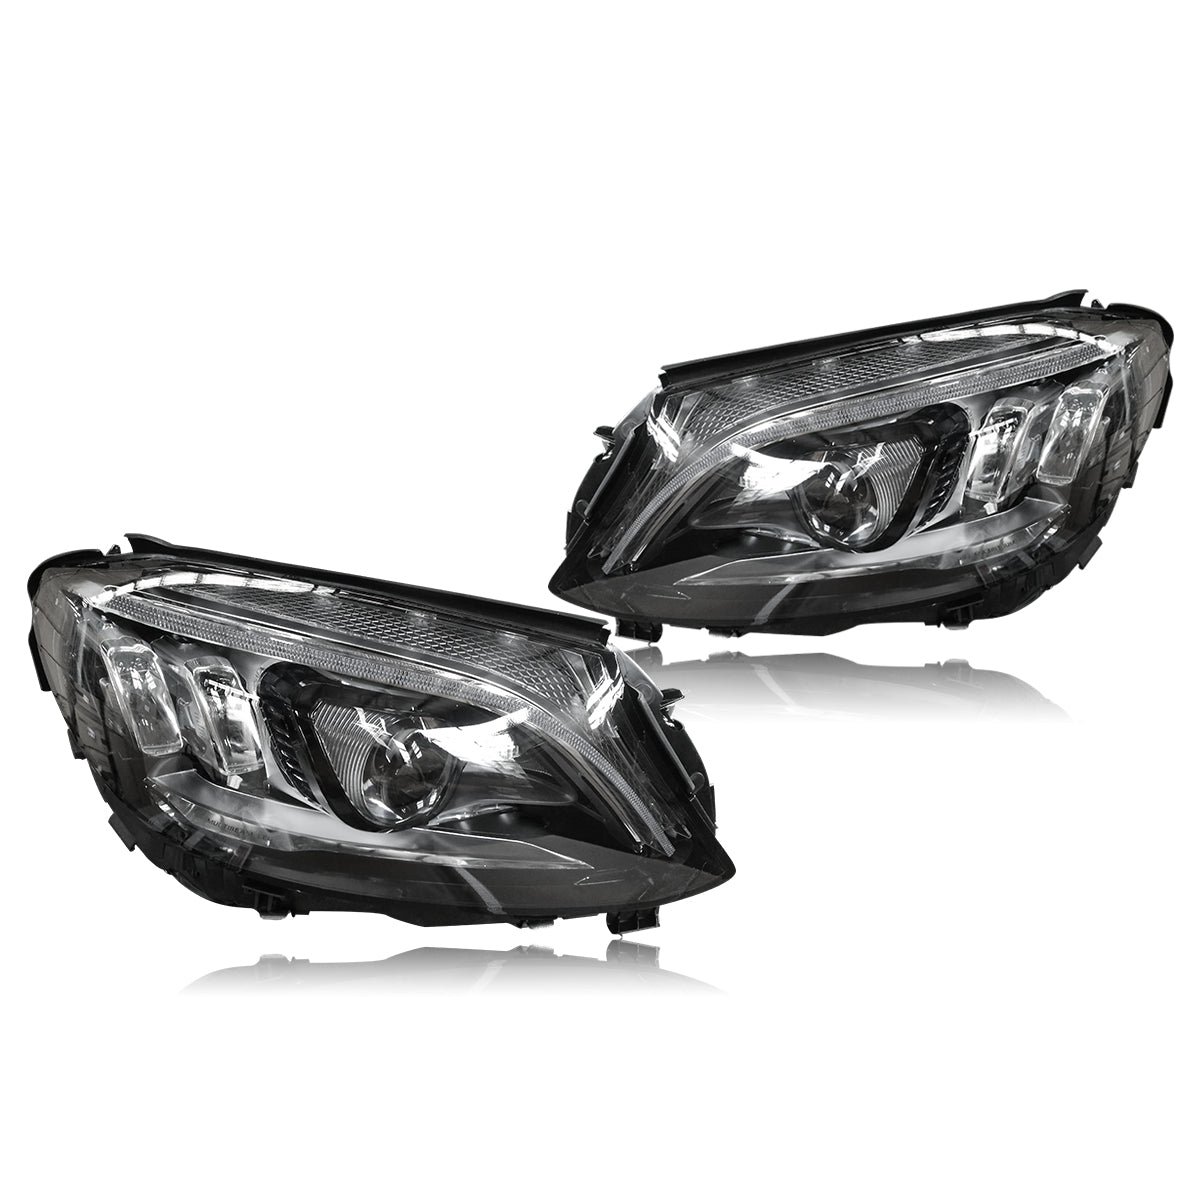 The headlight for W205 2015-2018 upgrade to 2019